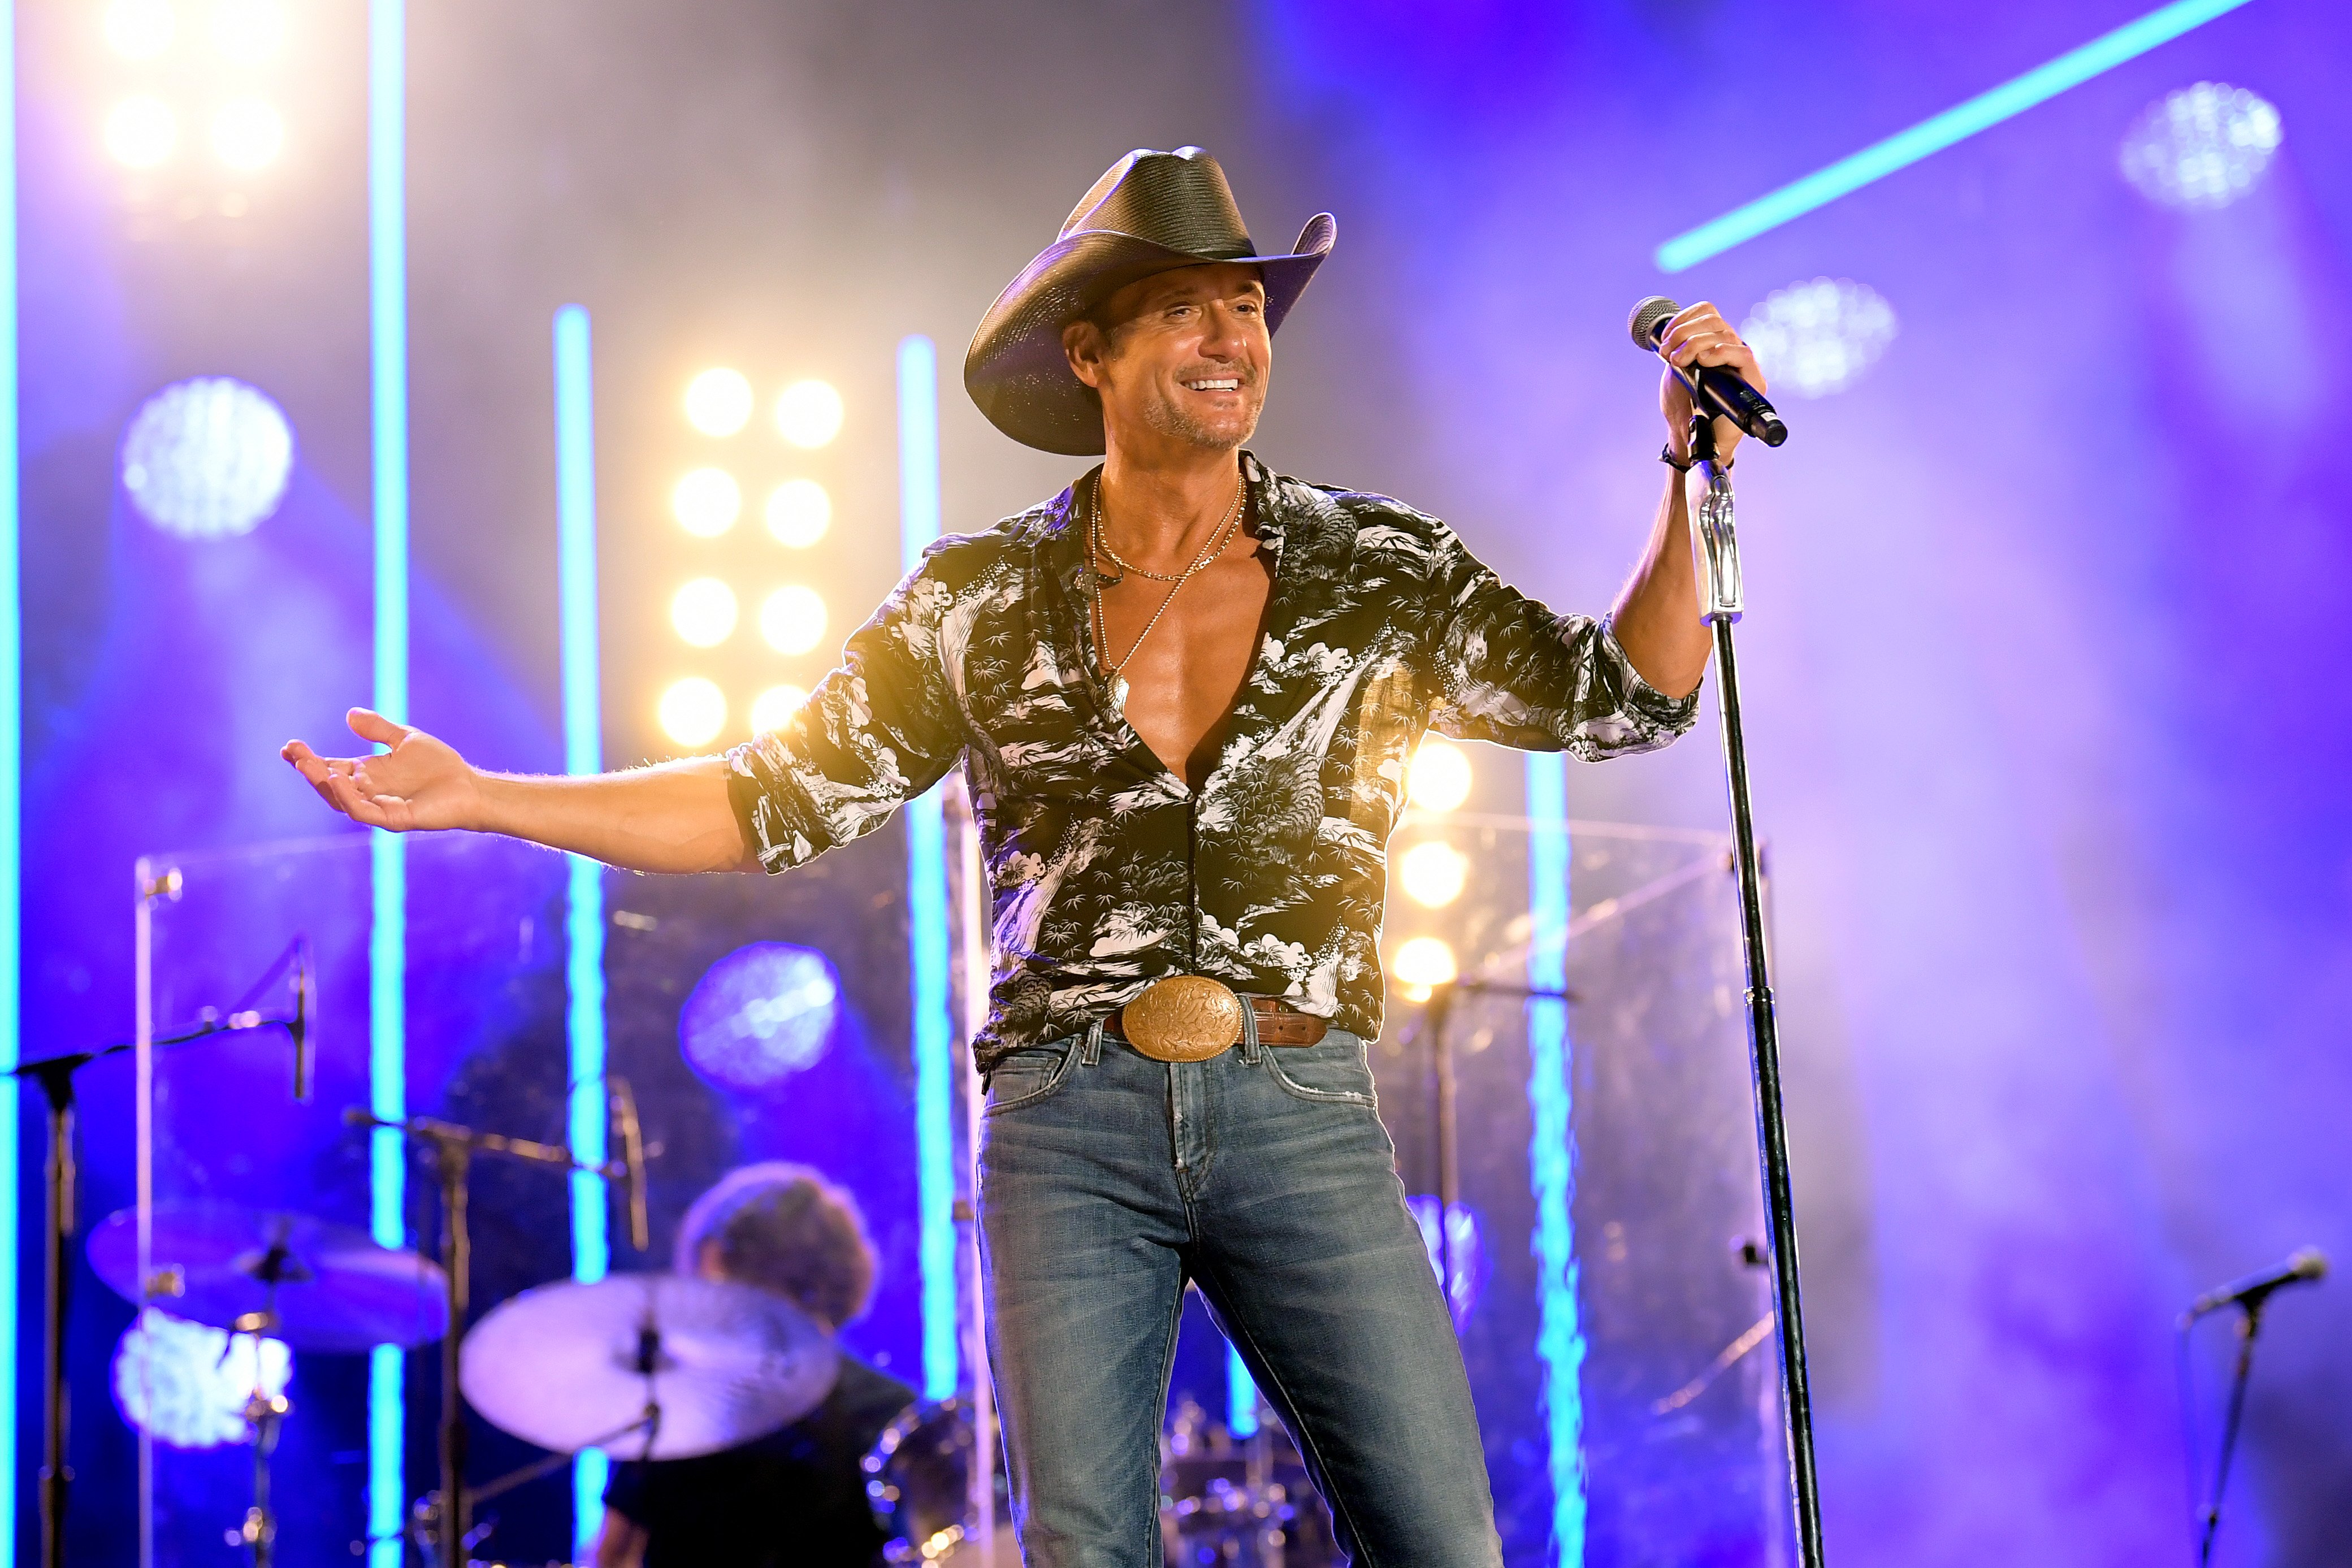 Tim McGraw performs on stage during day 3 of the 2019 CMA Music Festival on June 8, 2019 in Nashville, Tennessee. | Photo: Getty Images